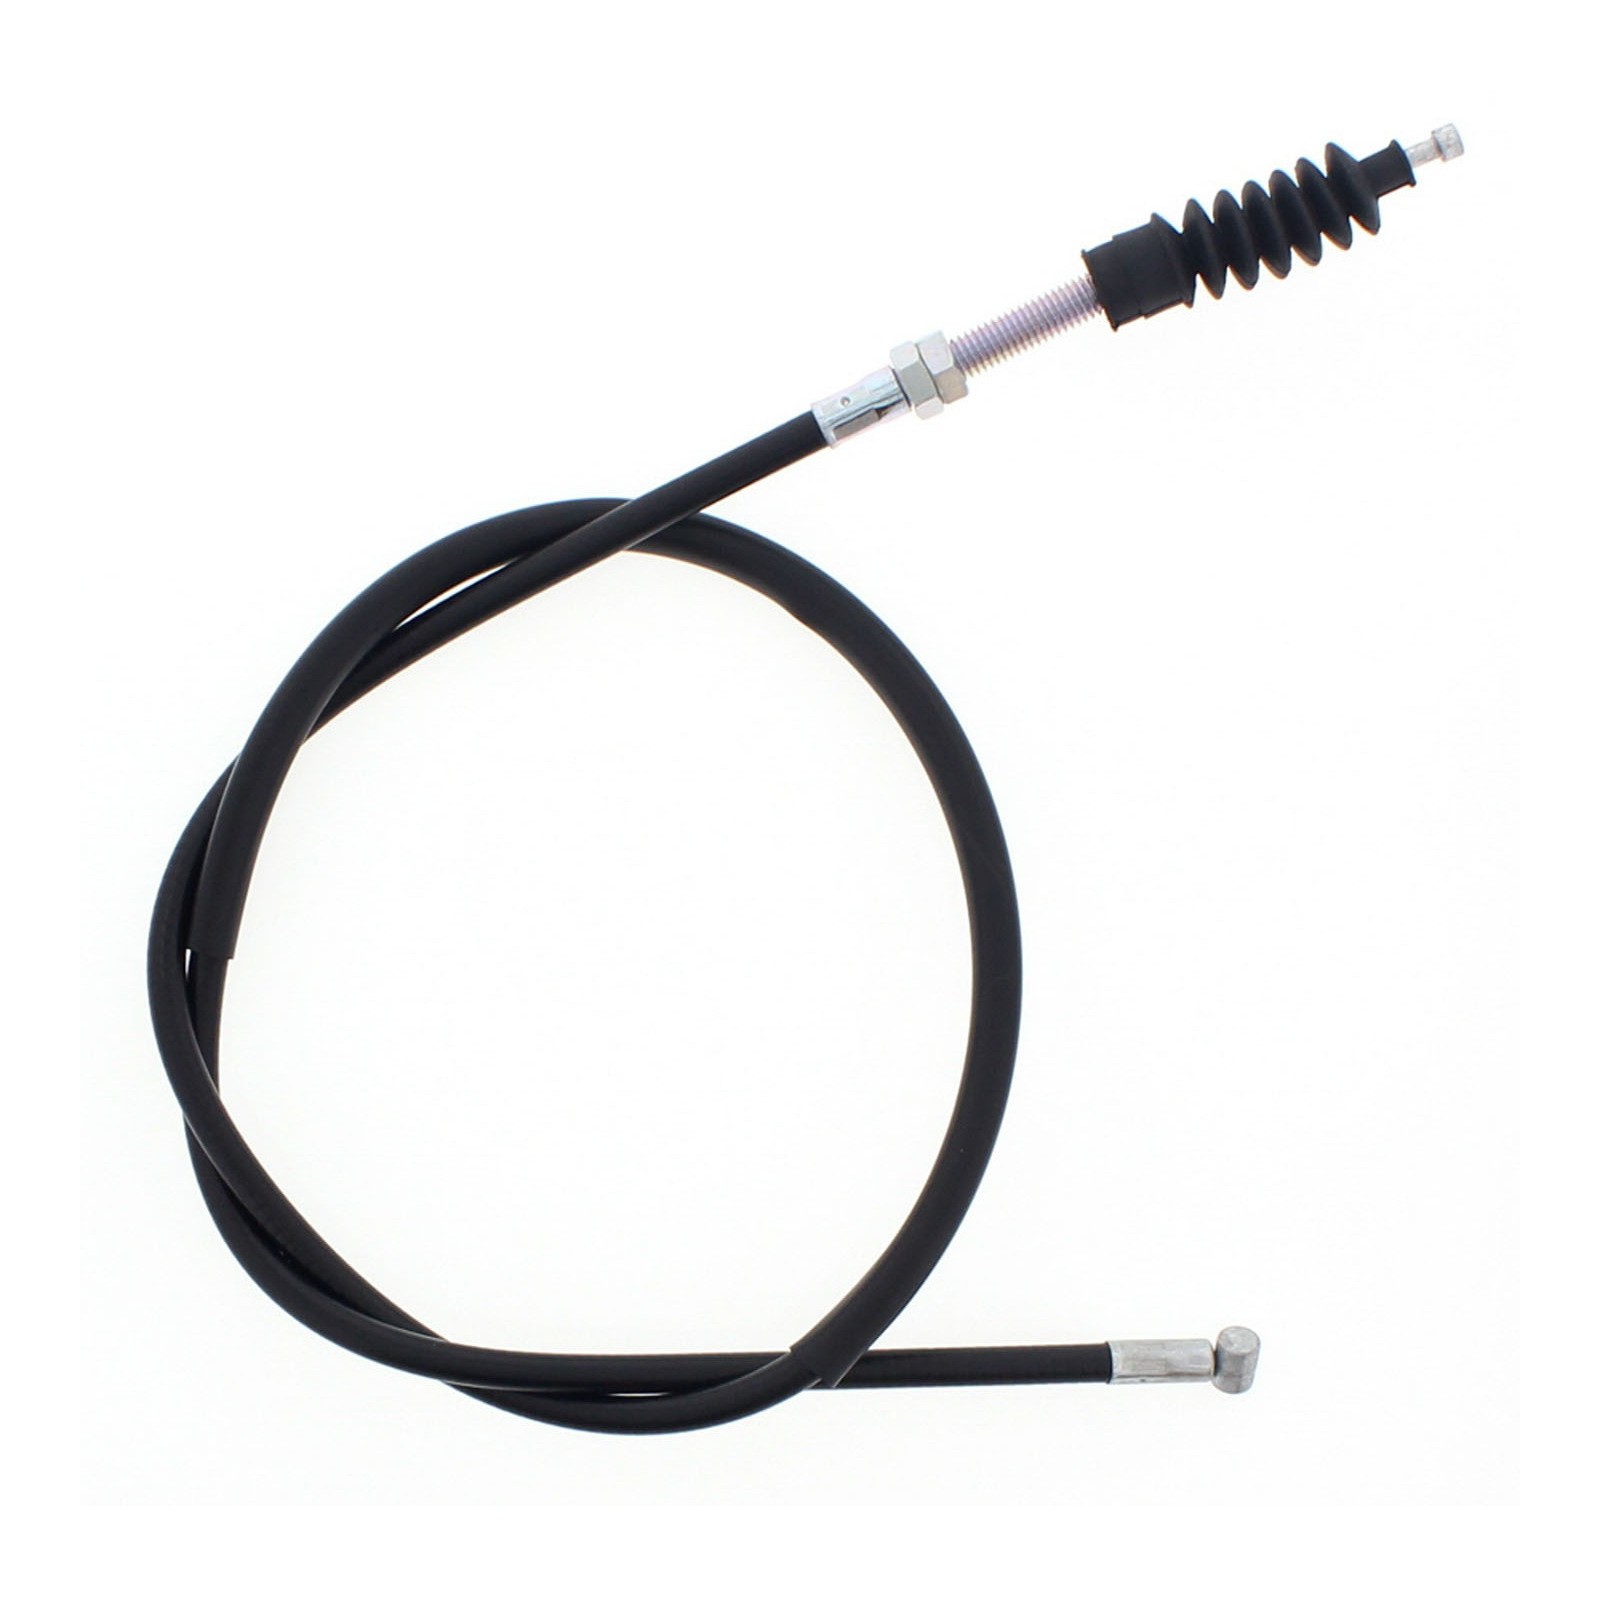 CLUTCH CABLE 45-2070